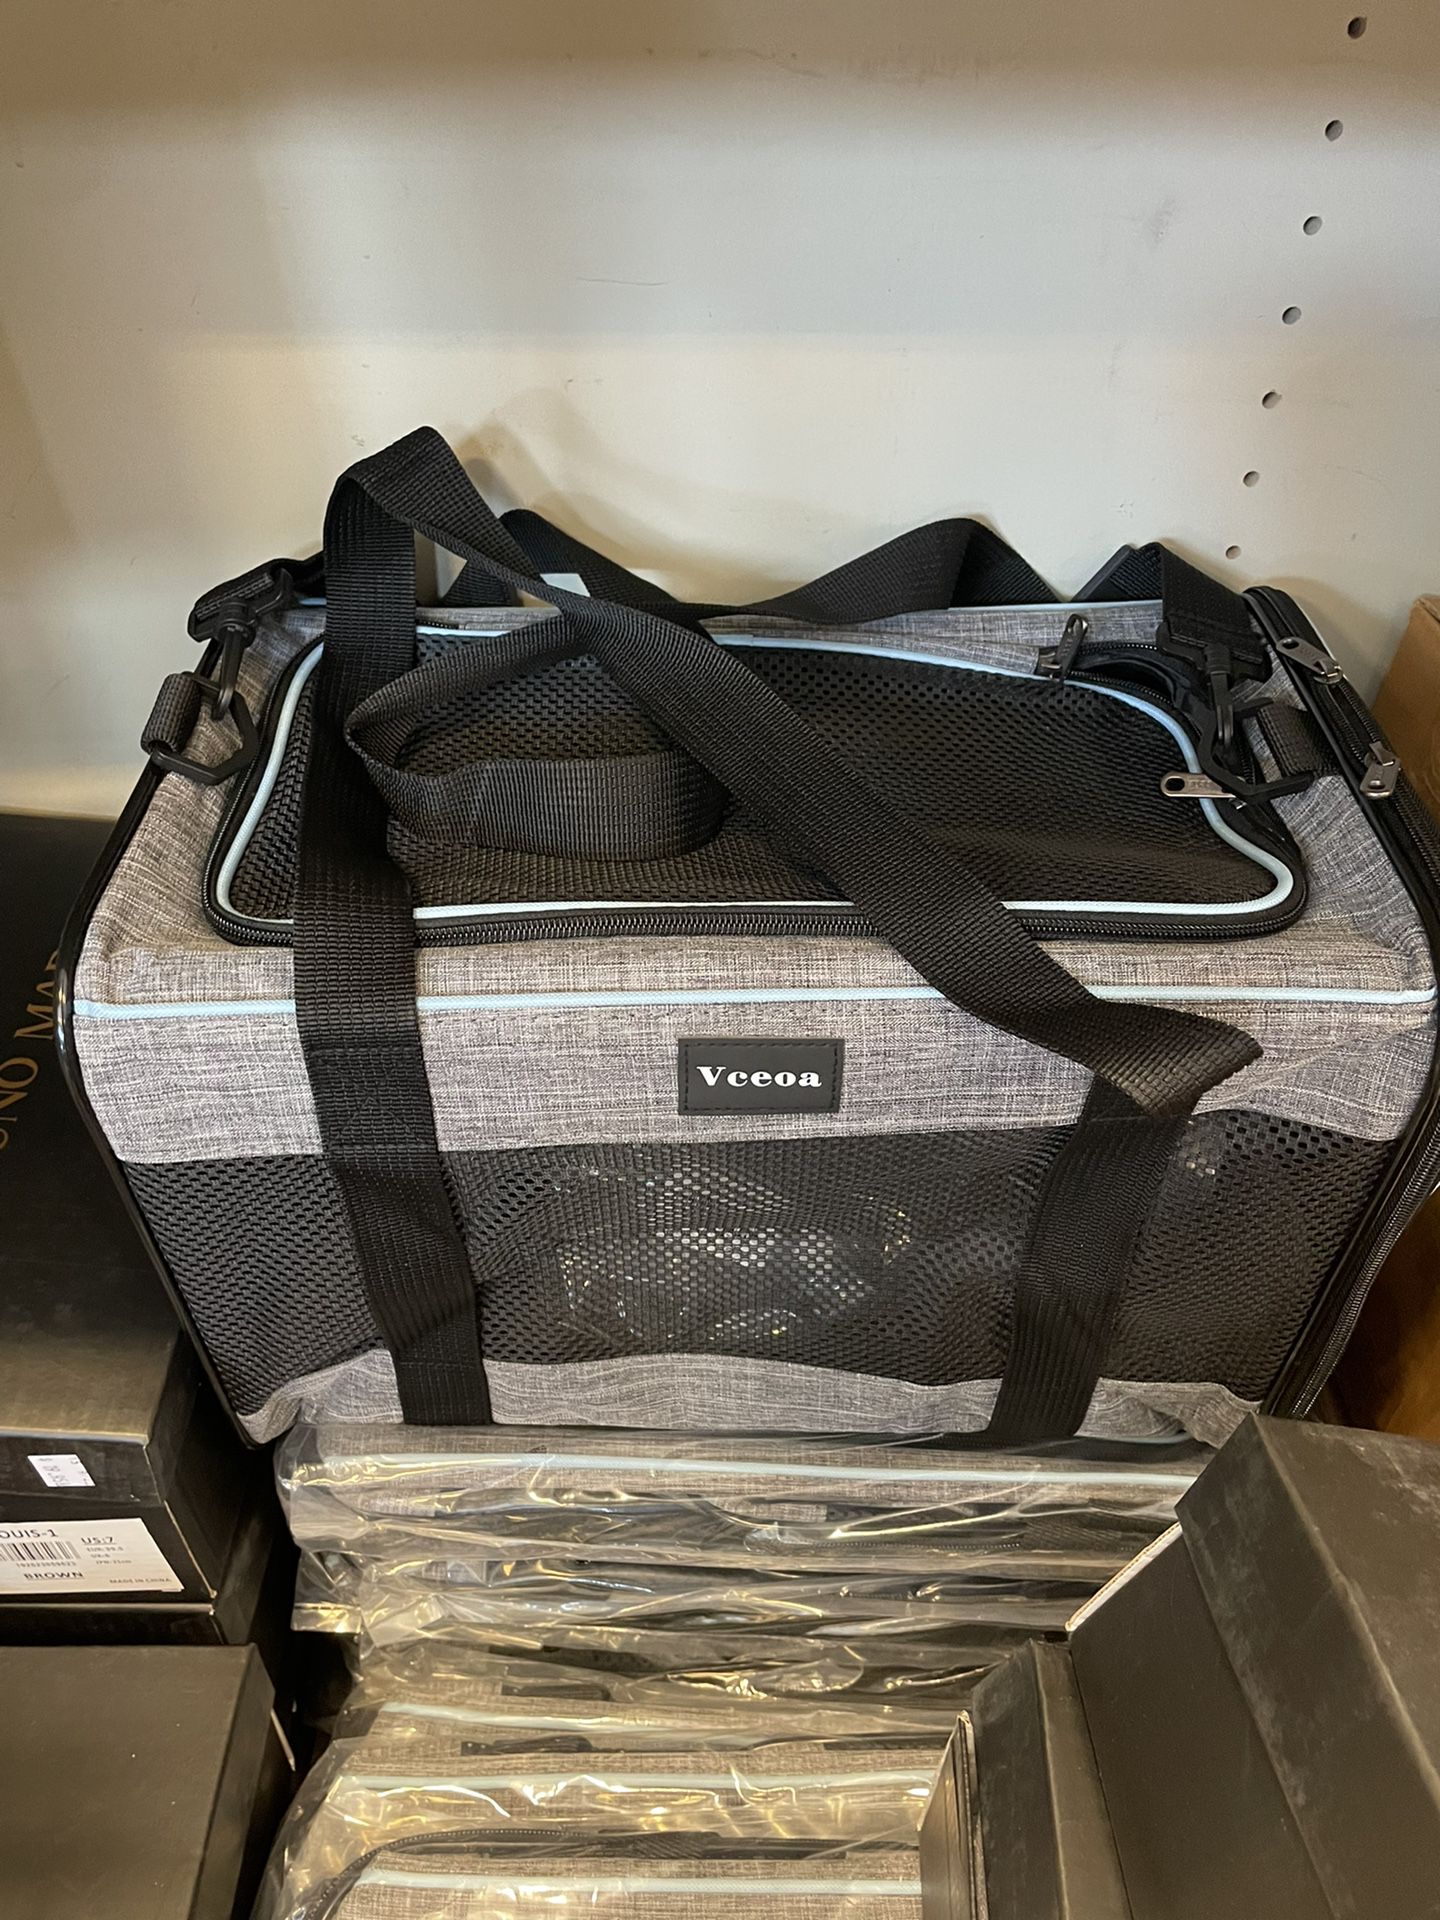 Dog Carry Bag - Brand New In Plastic